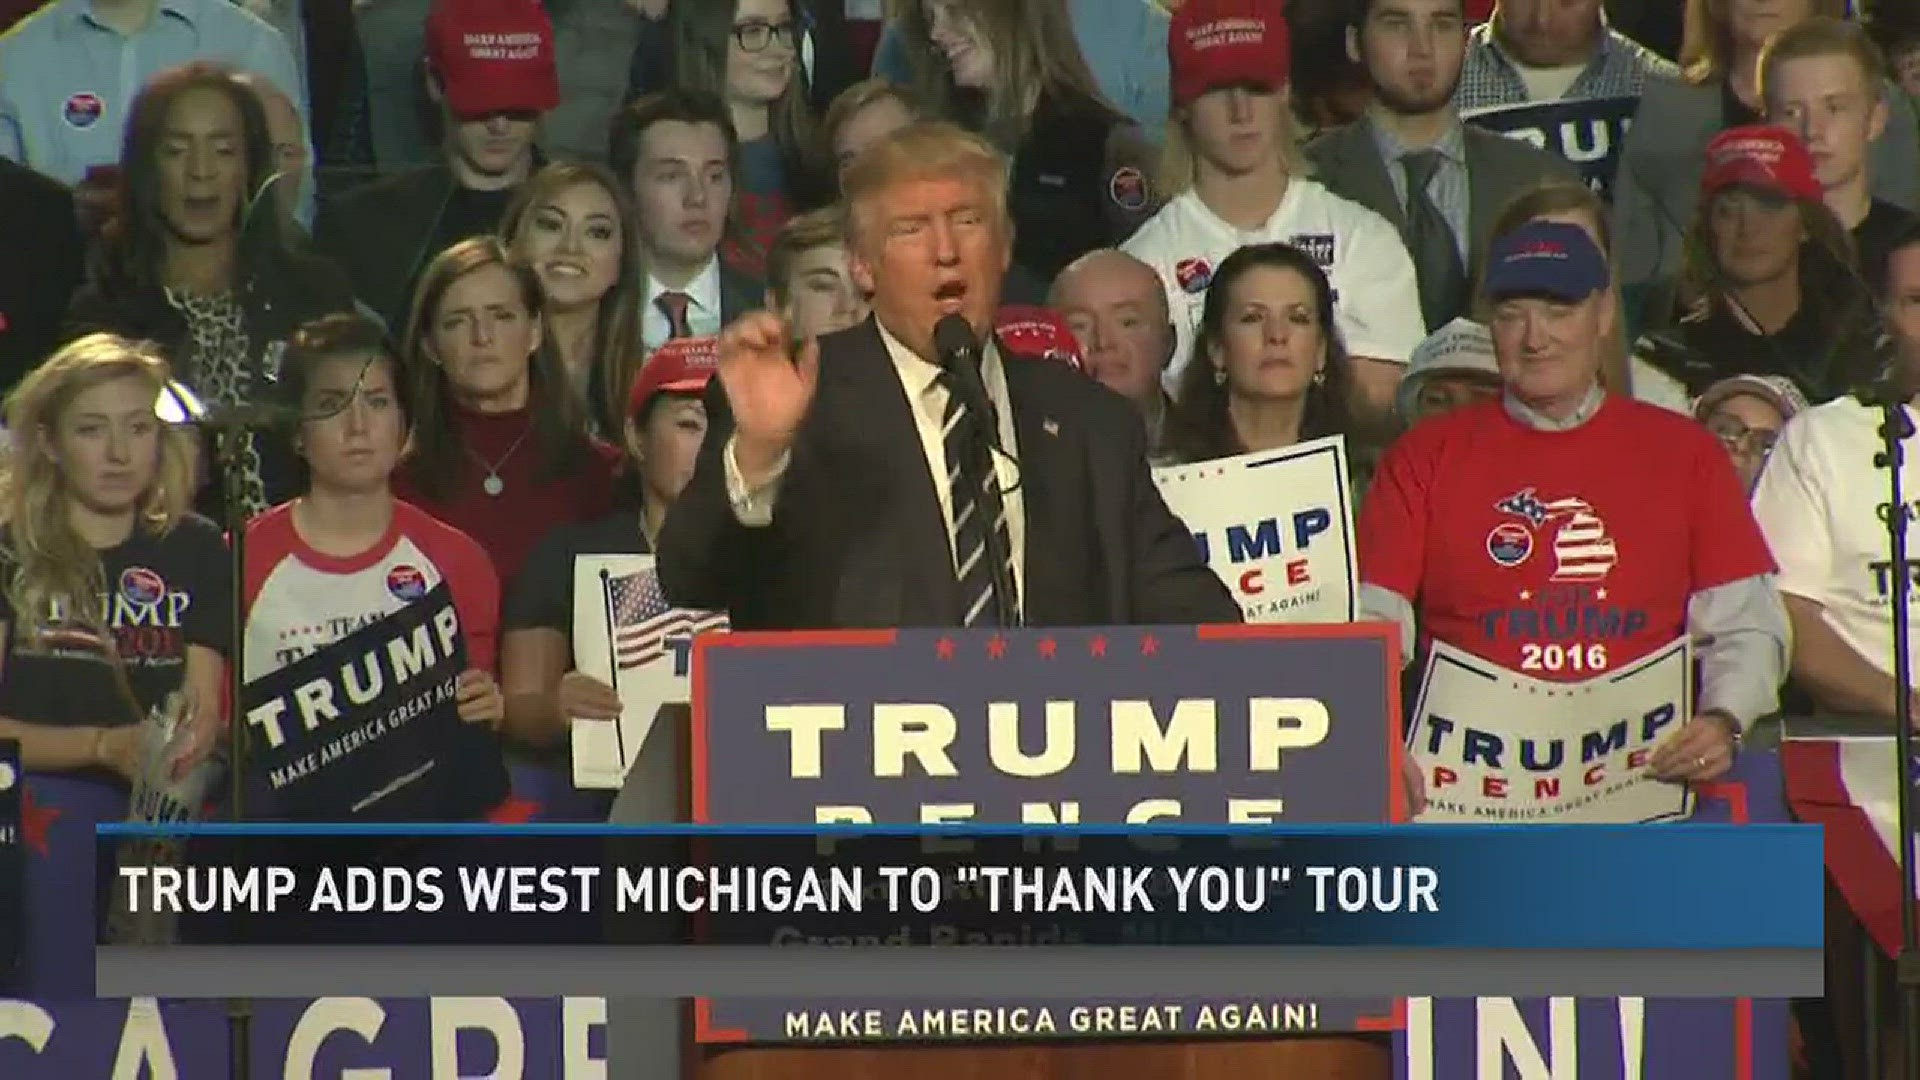 Trumps adds West Michigan to "Thank you" tour